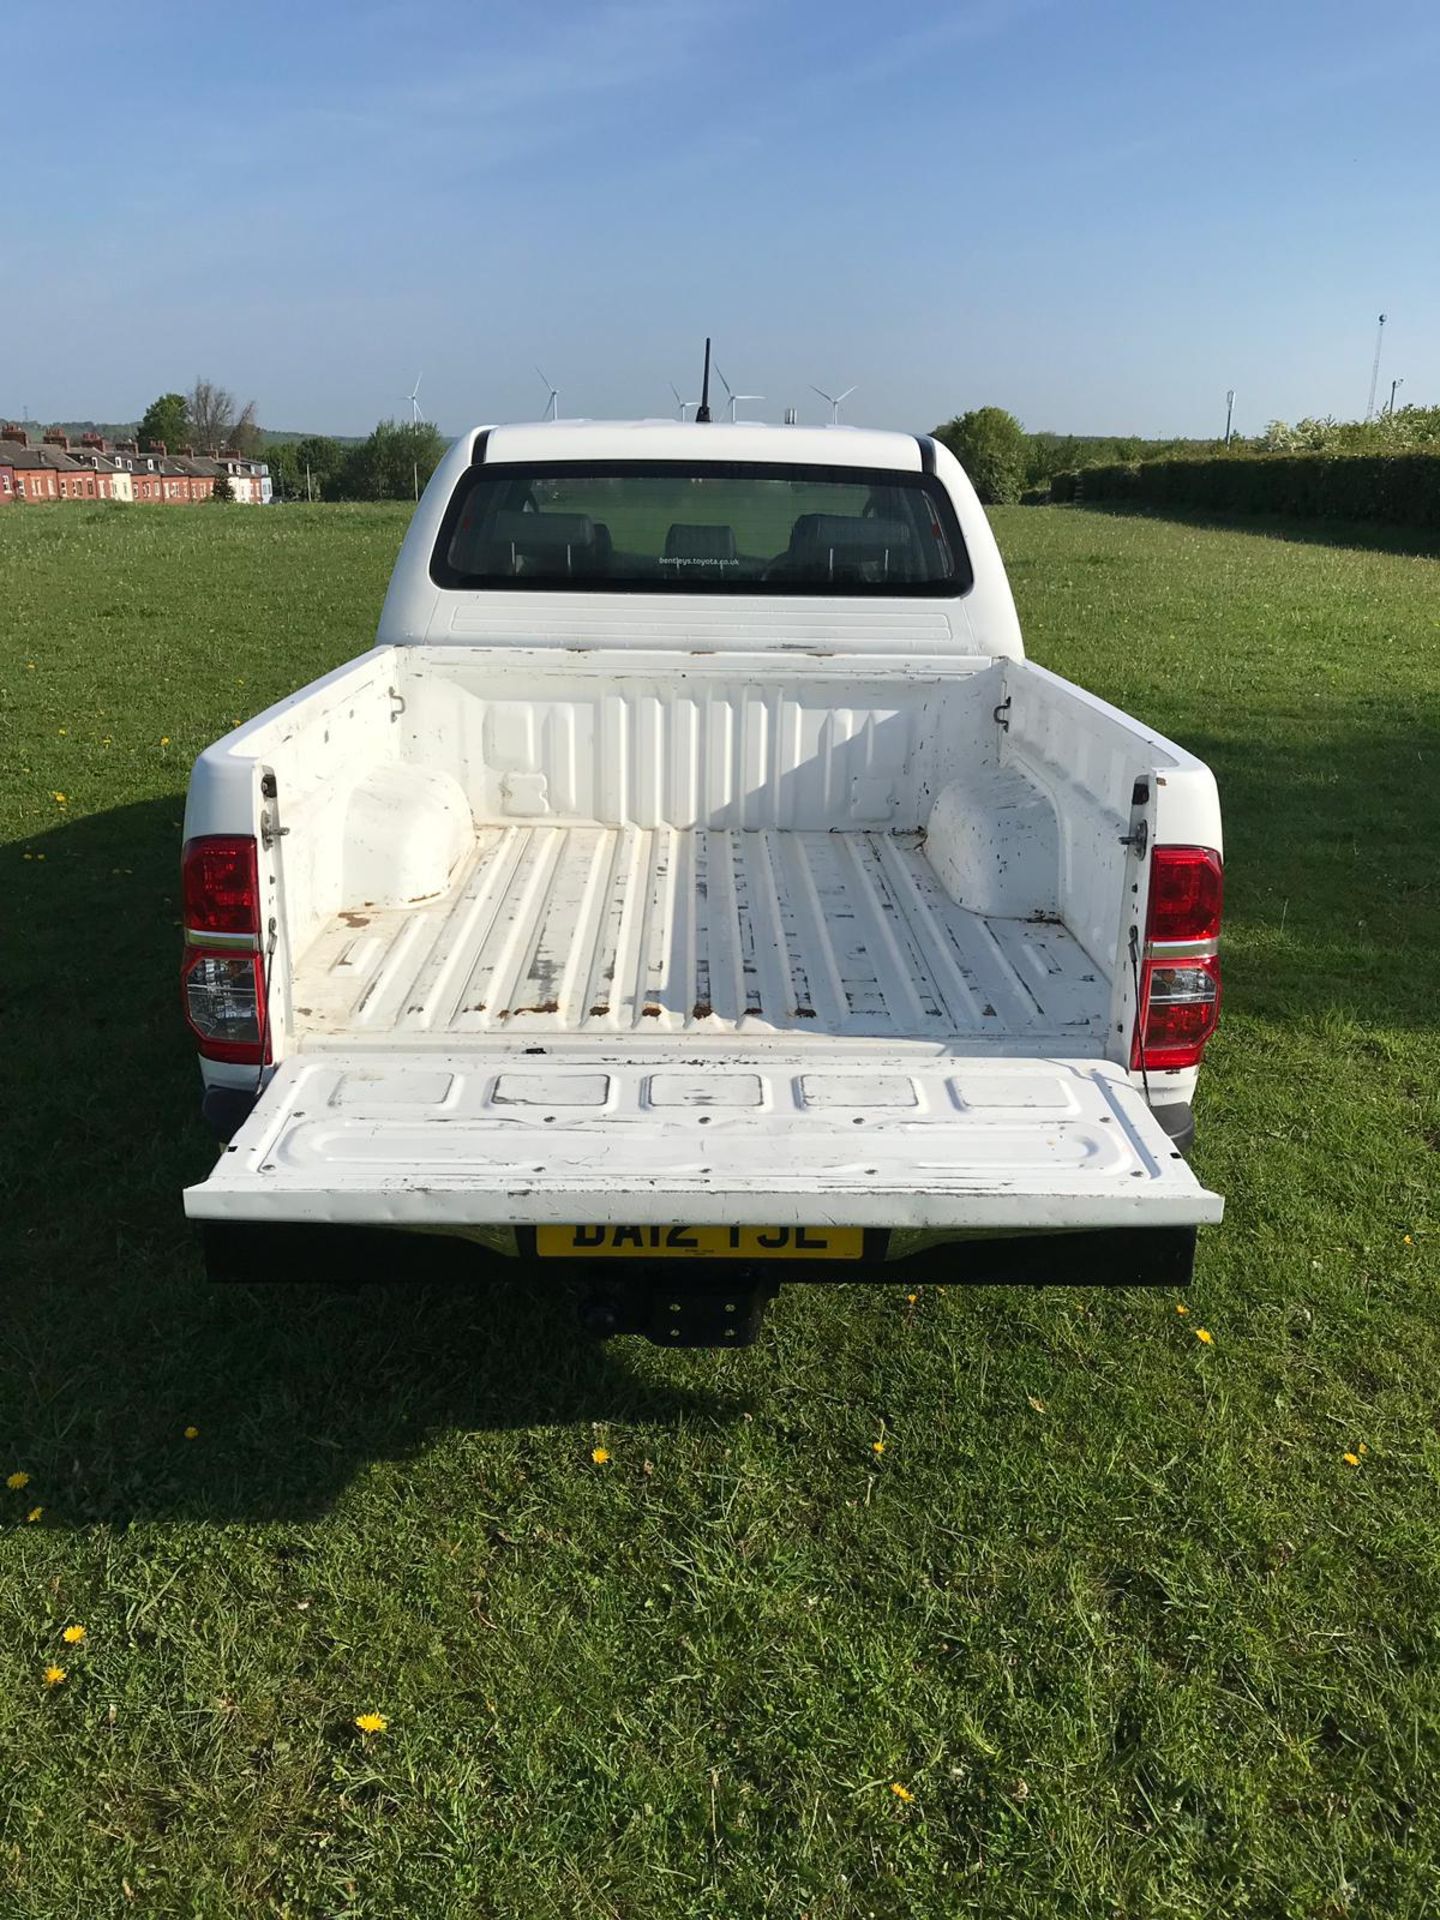 2012/12 REG TOYOTA HILUX HL2 D-4D 4X4 DOUBLE CAB PICK-UP 2.5 DIESEL, SHOWING 0 FORMER KEEPERS - Image 5 of 13